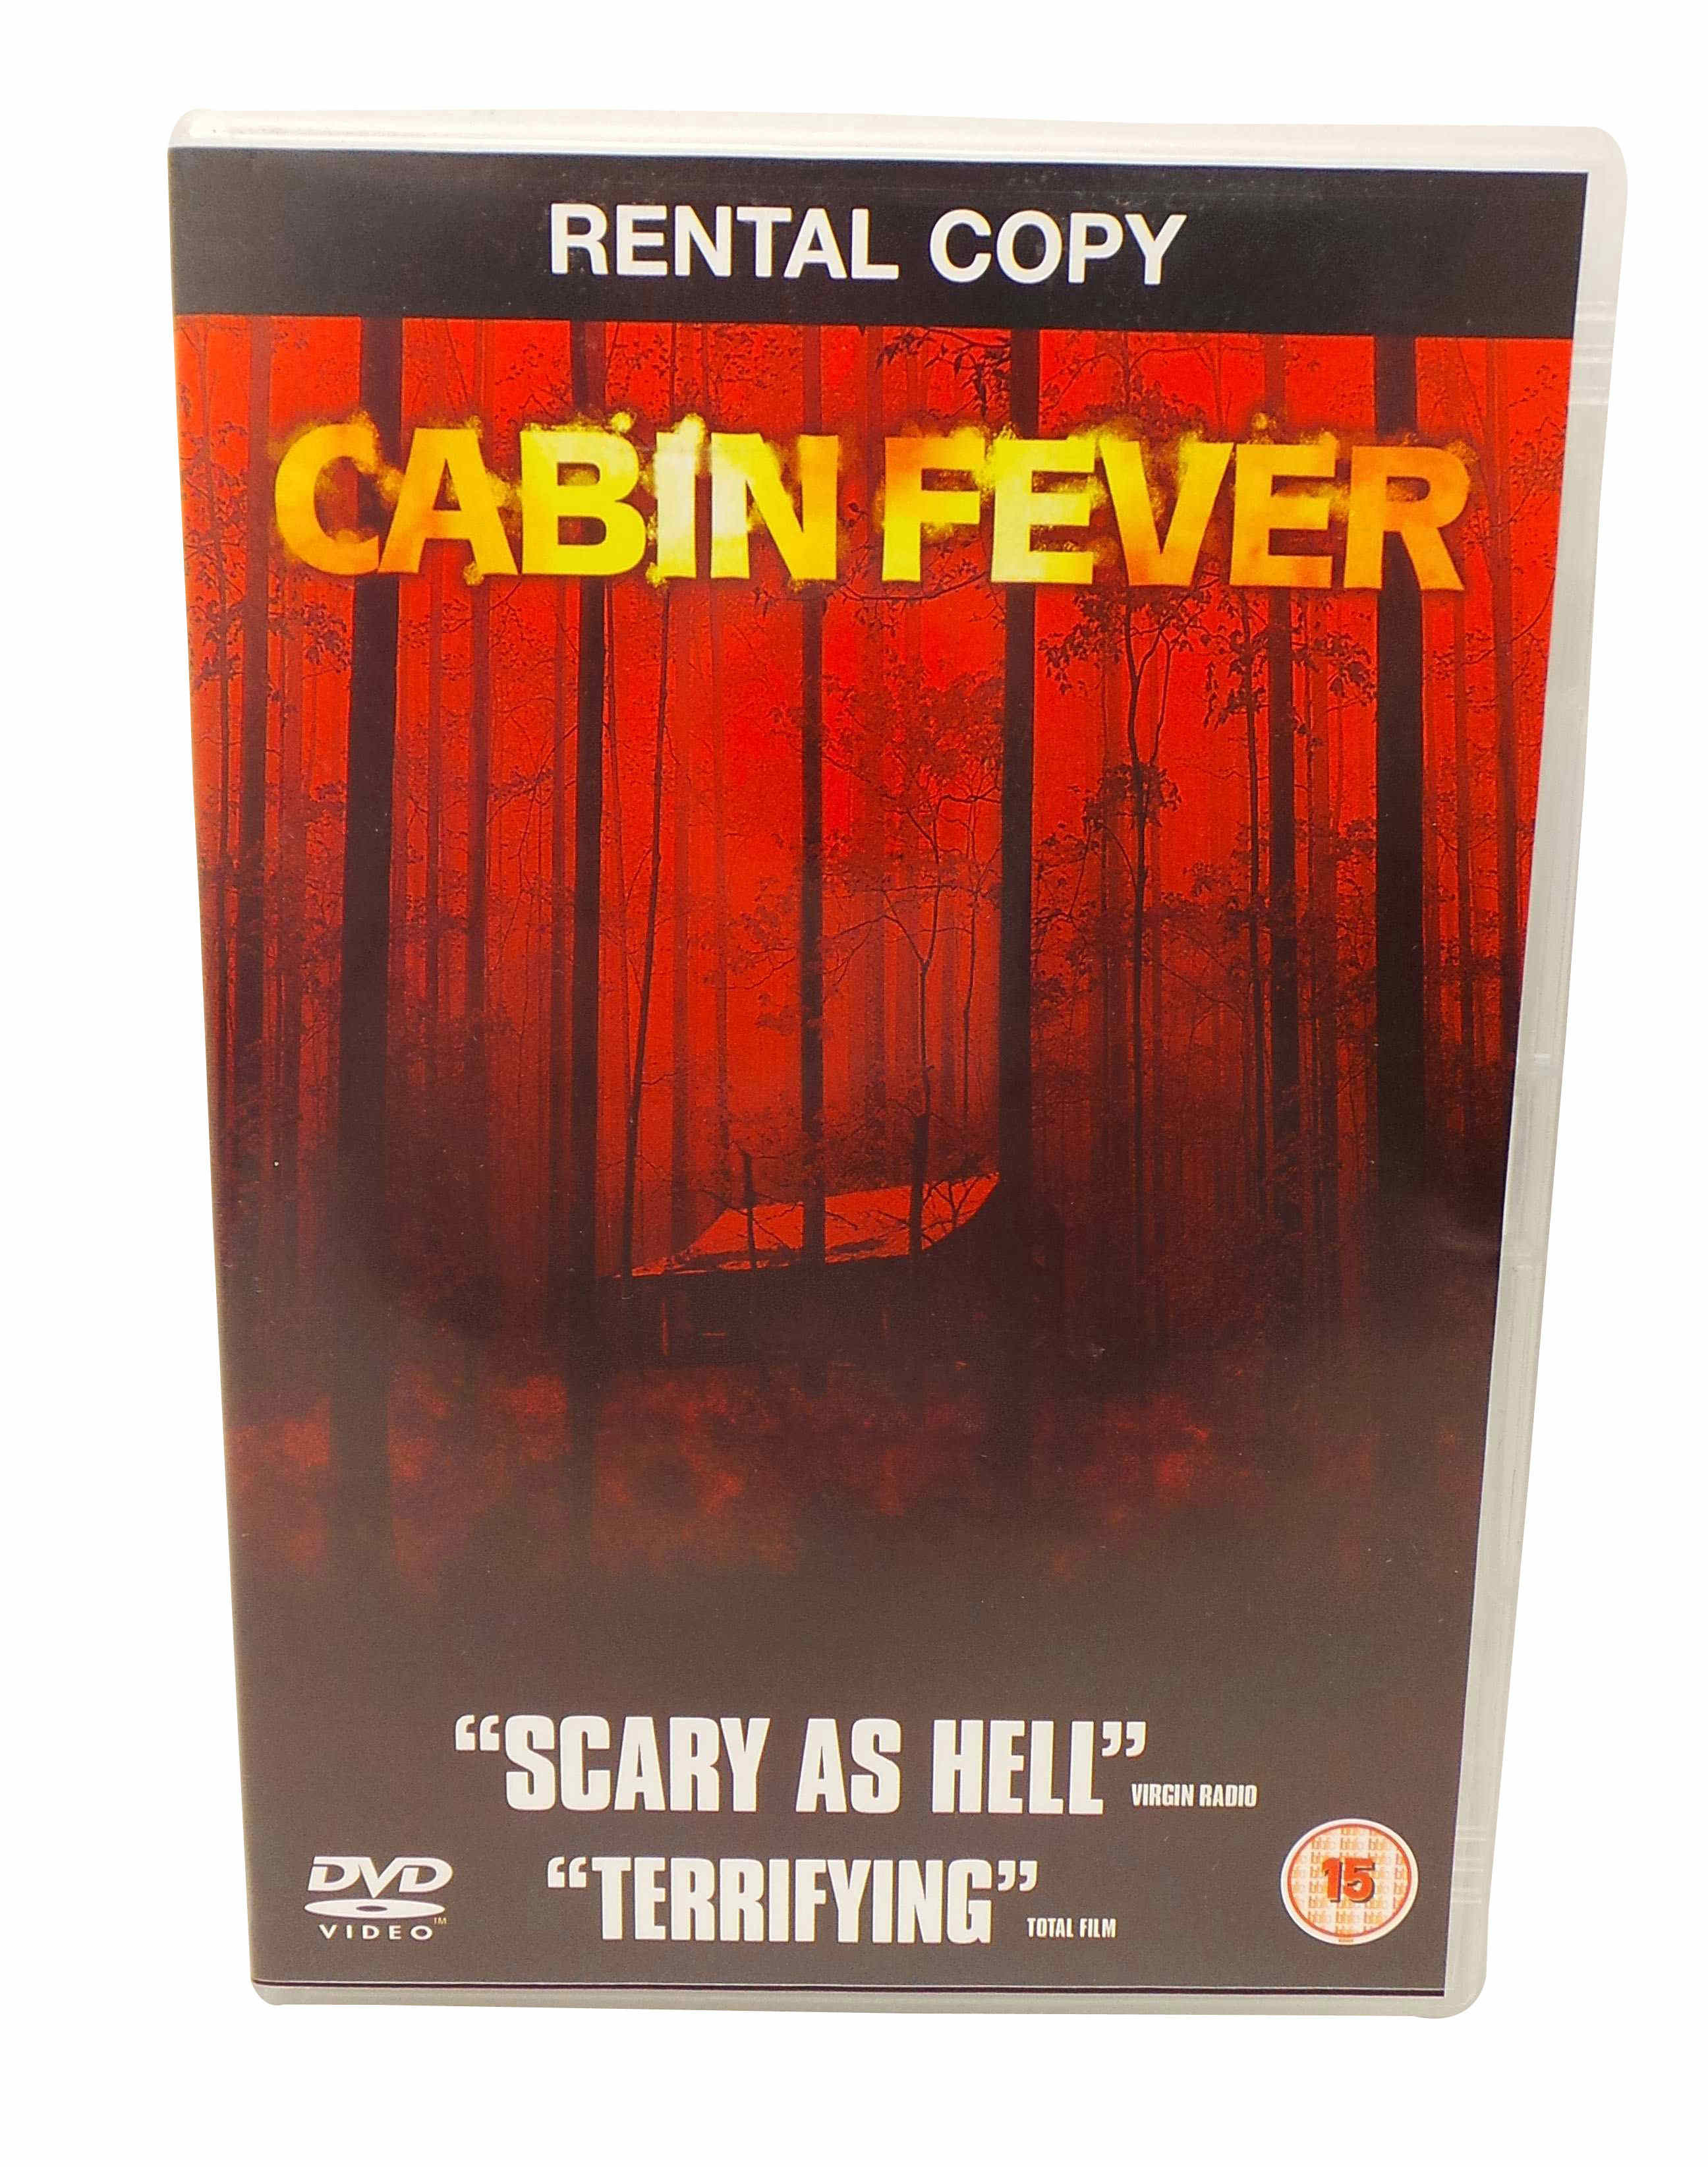 cabin fever auctions e mail address